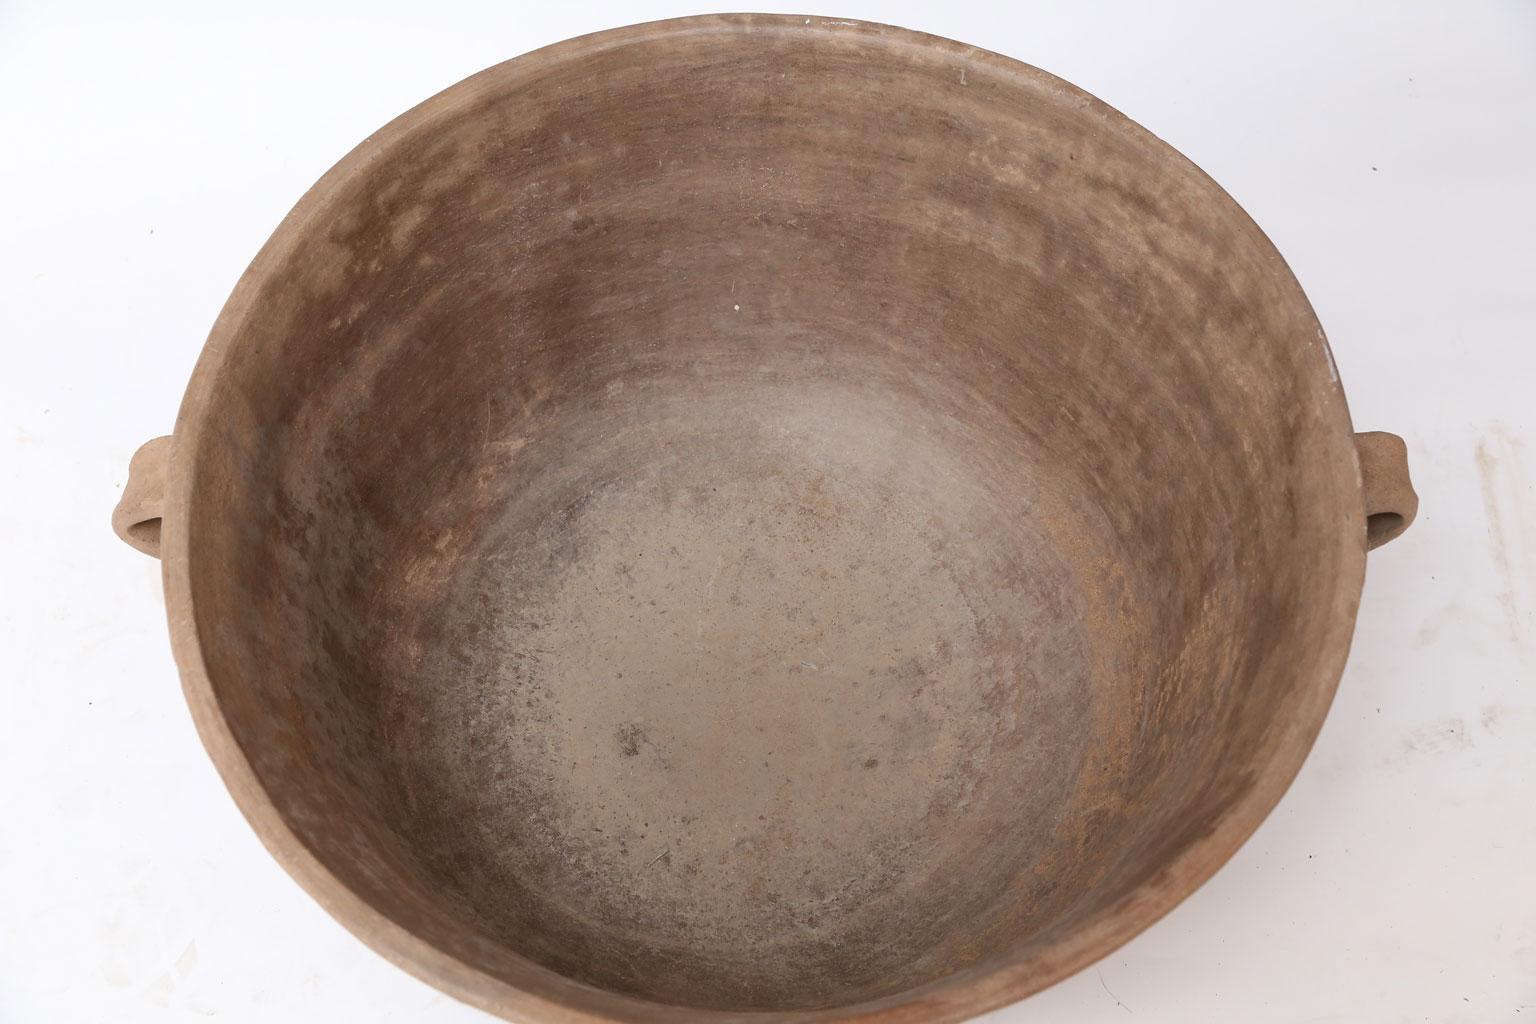 Large Primitive Clay Cooking Bowl im Zustand „Gut“ in Houston, TX